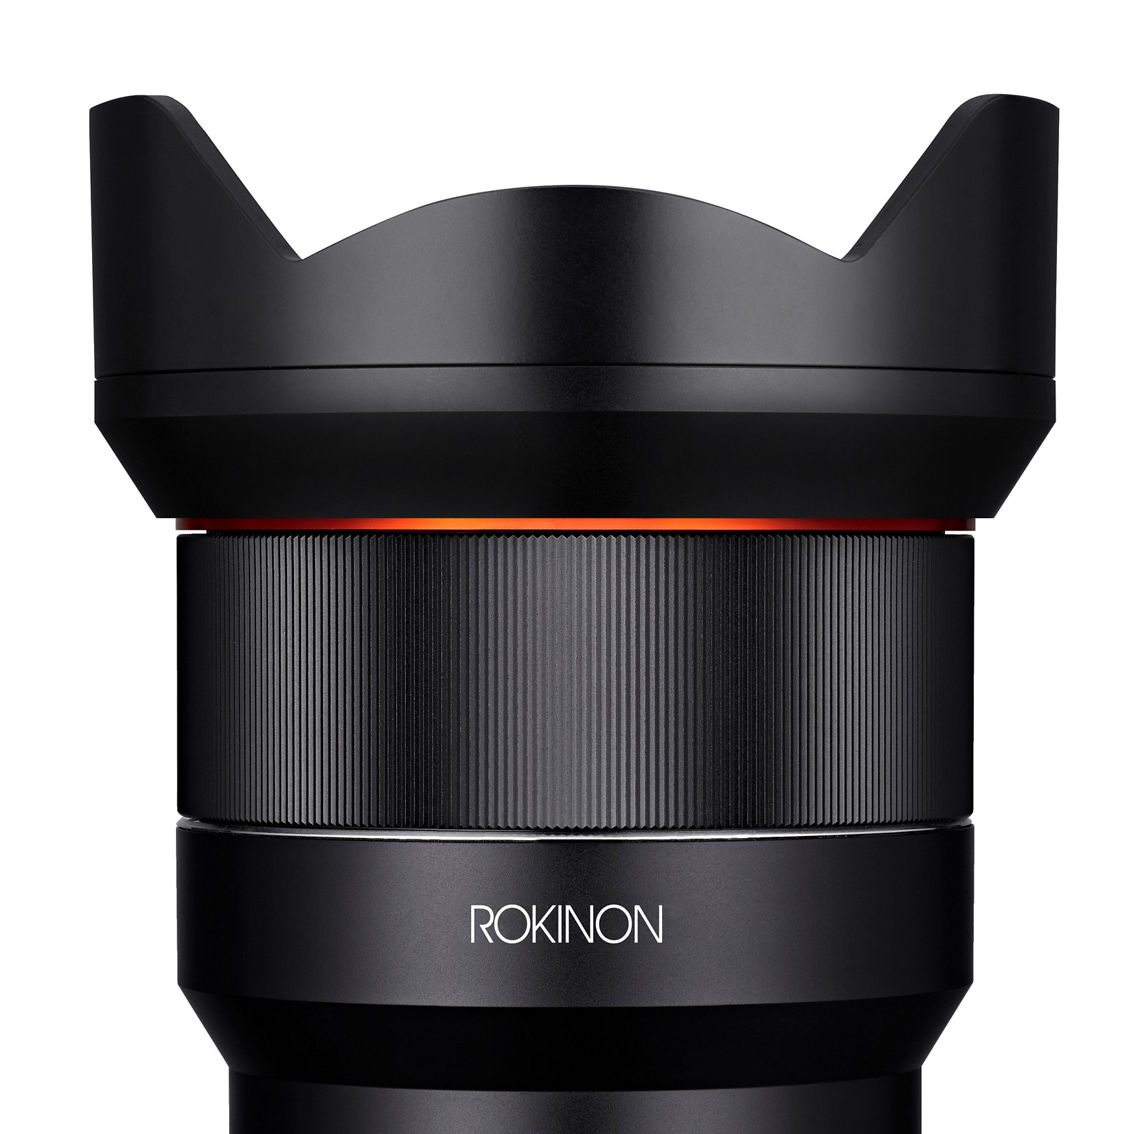 Rokinon 14mm F2.8 AF Full Frame Ultra Wide Angle Lens for Sony E - Image 2 of 5